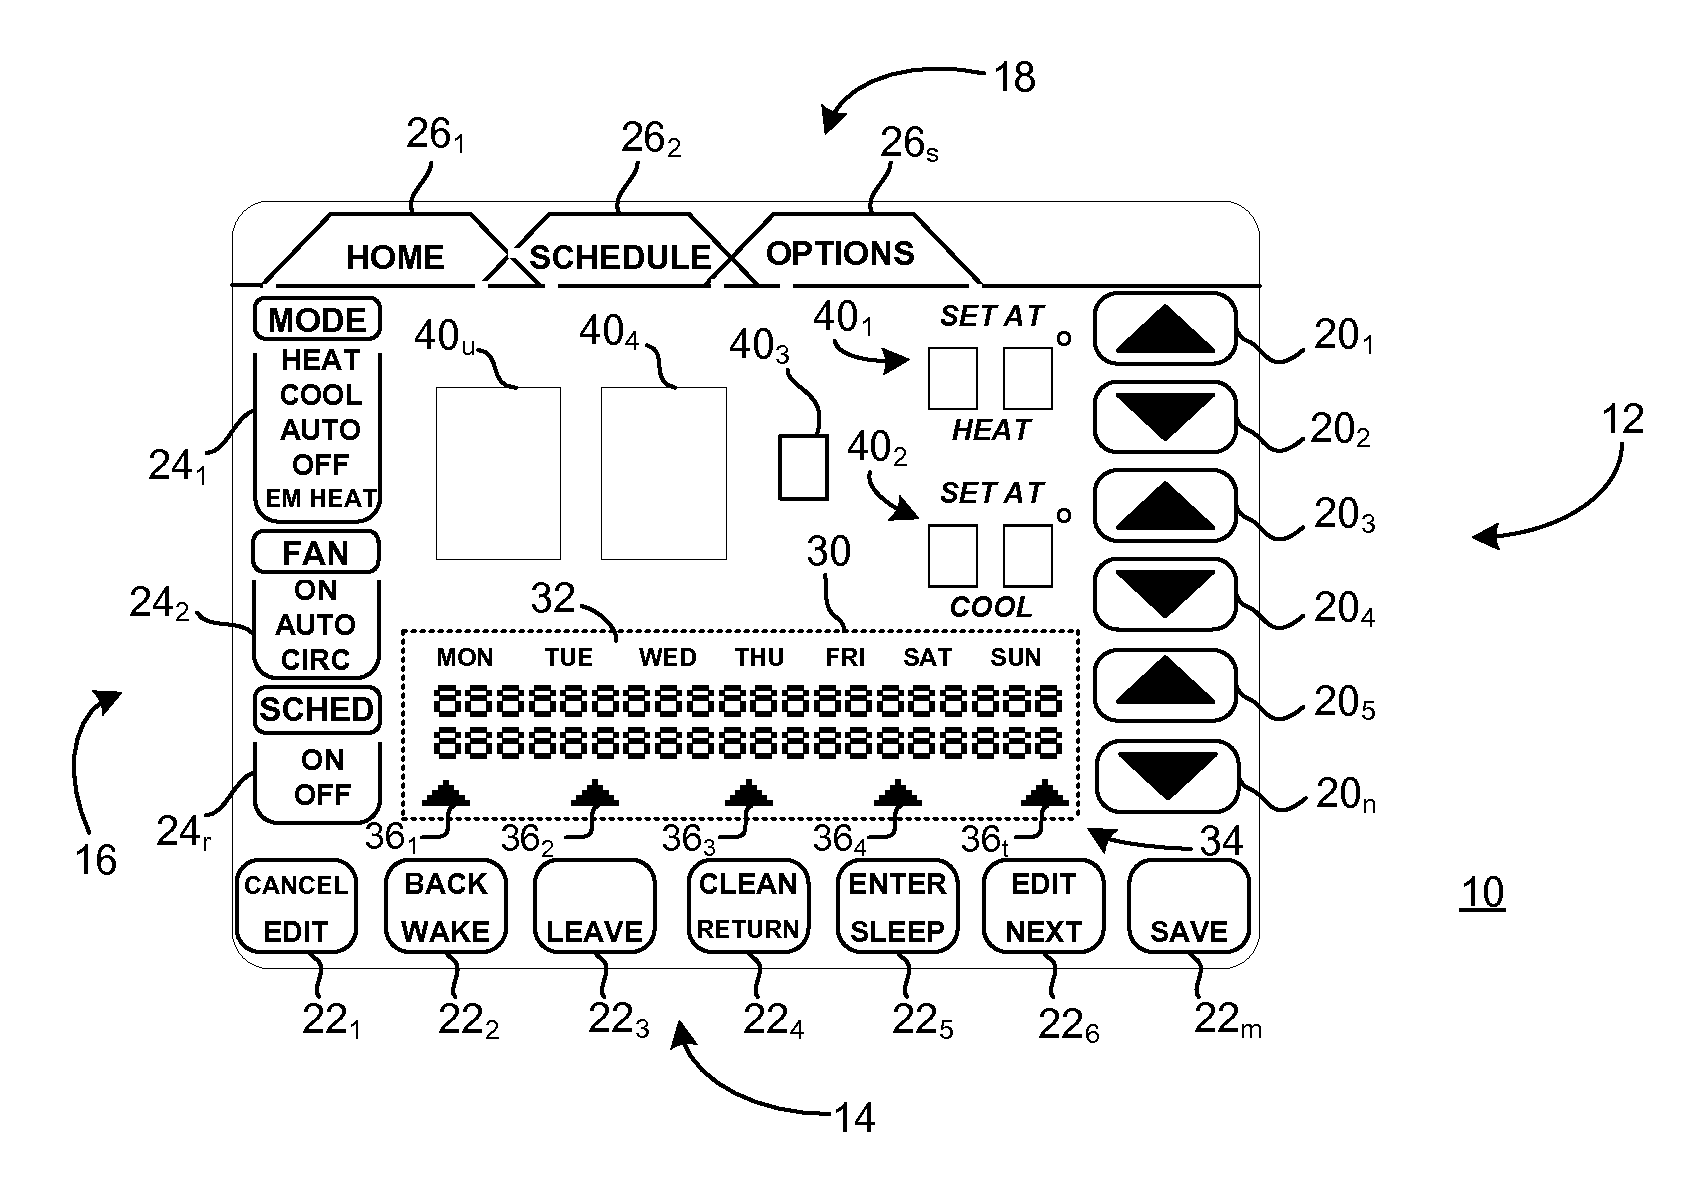 Display apparatus and method for entering a reminder in a control unit for an environmental control system